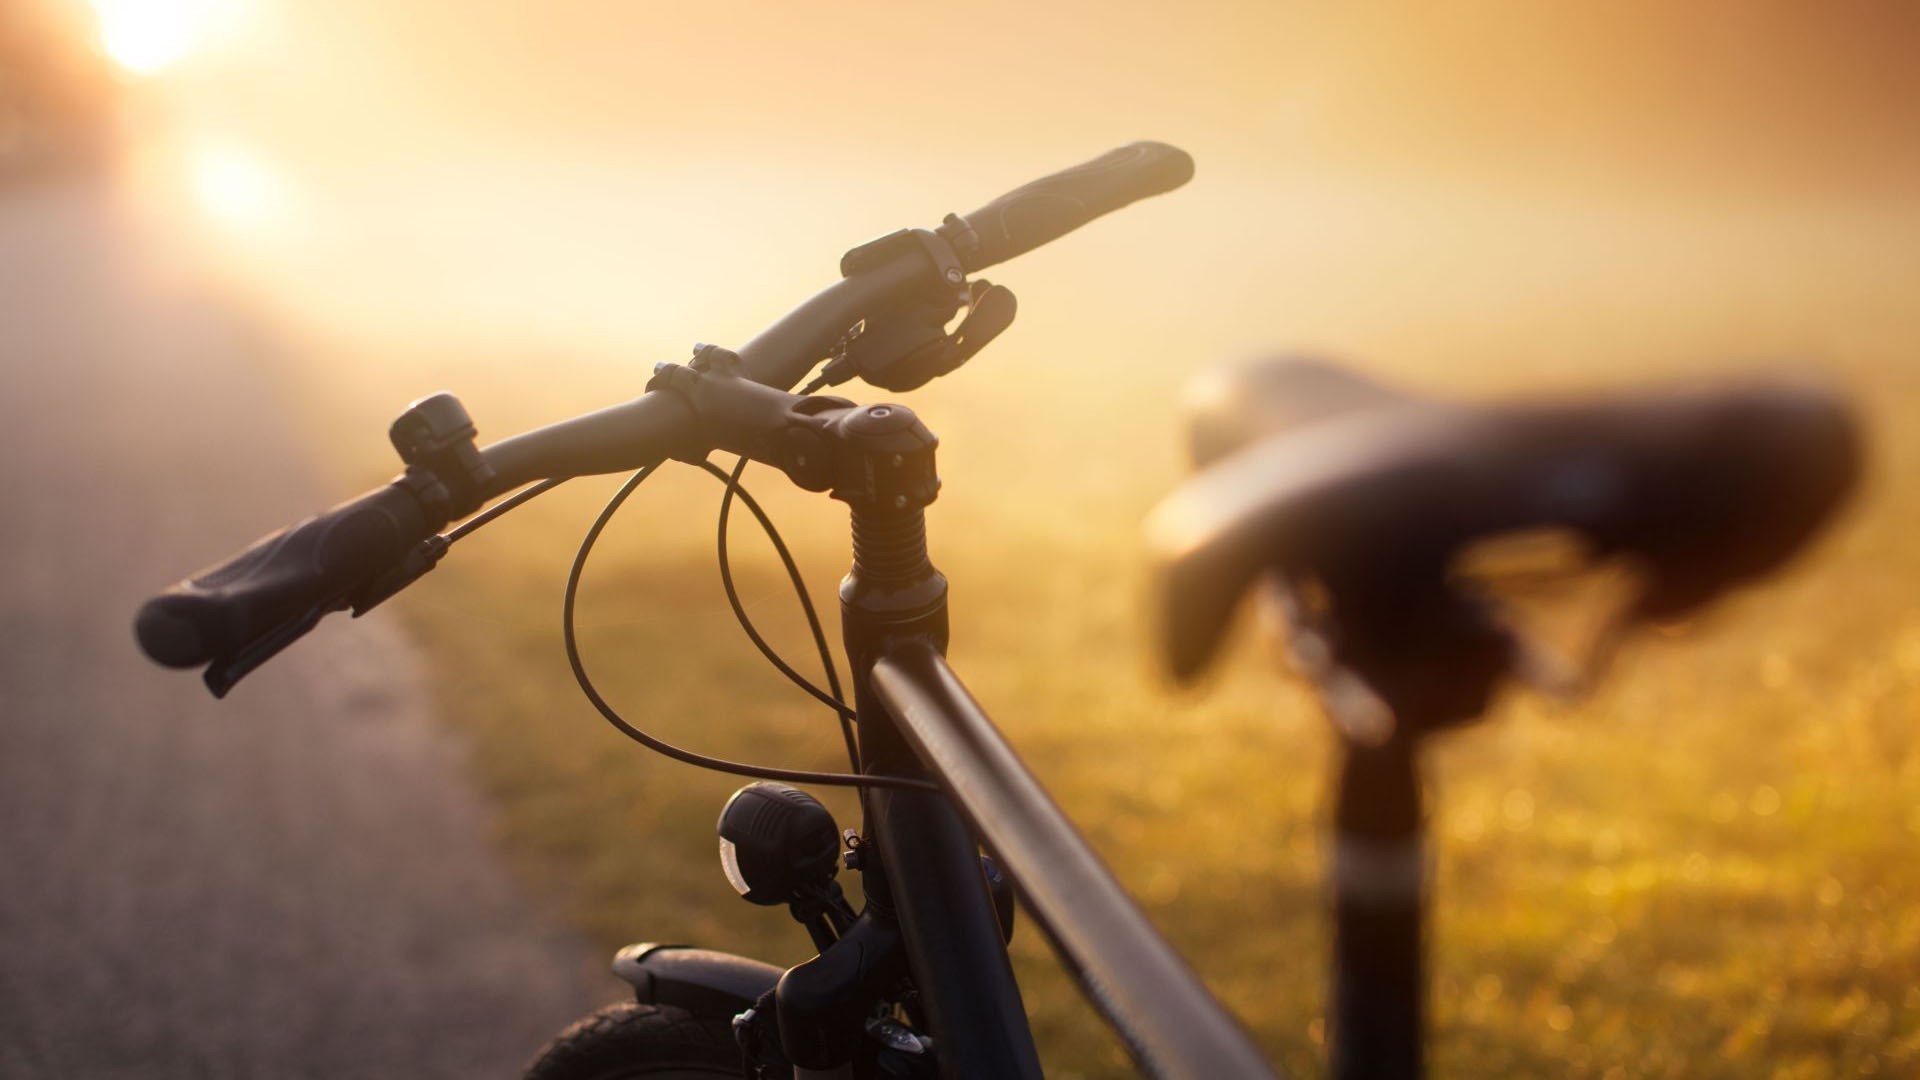 General 1920x1080 bicycle sunlight vehicle